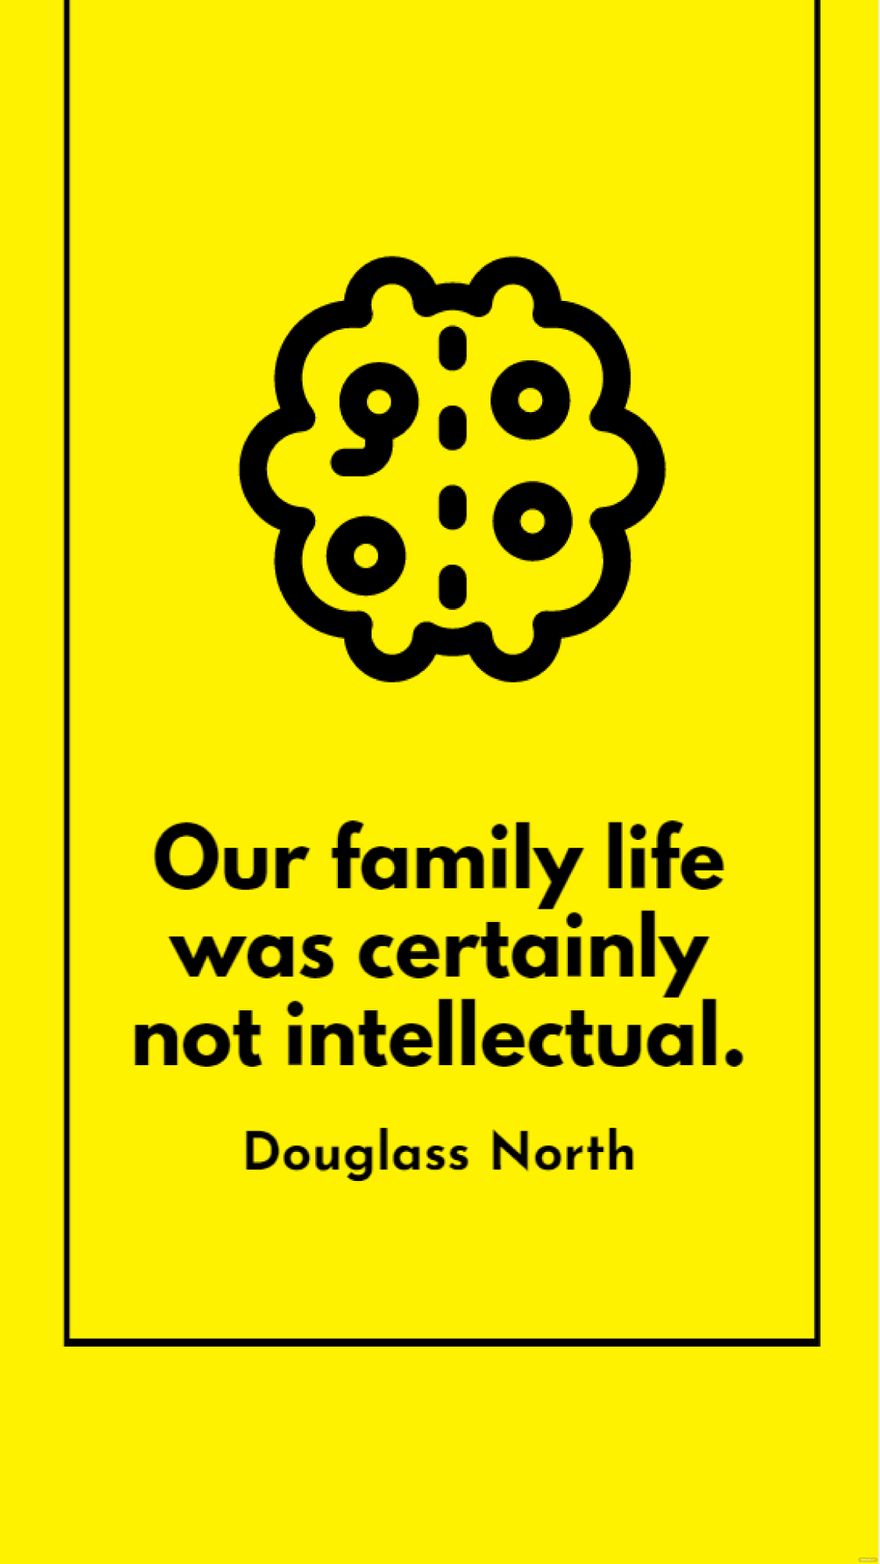 Douglass North - Our family life was certainly not intellectual.